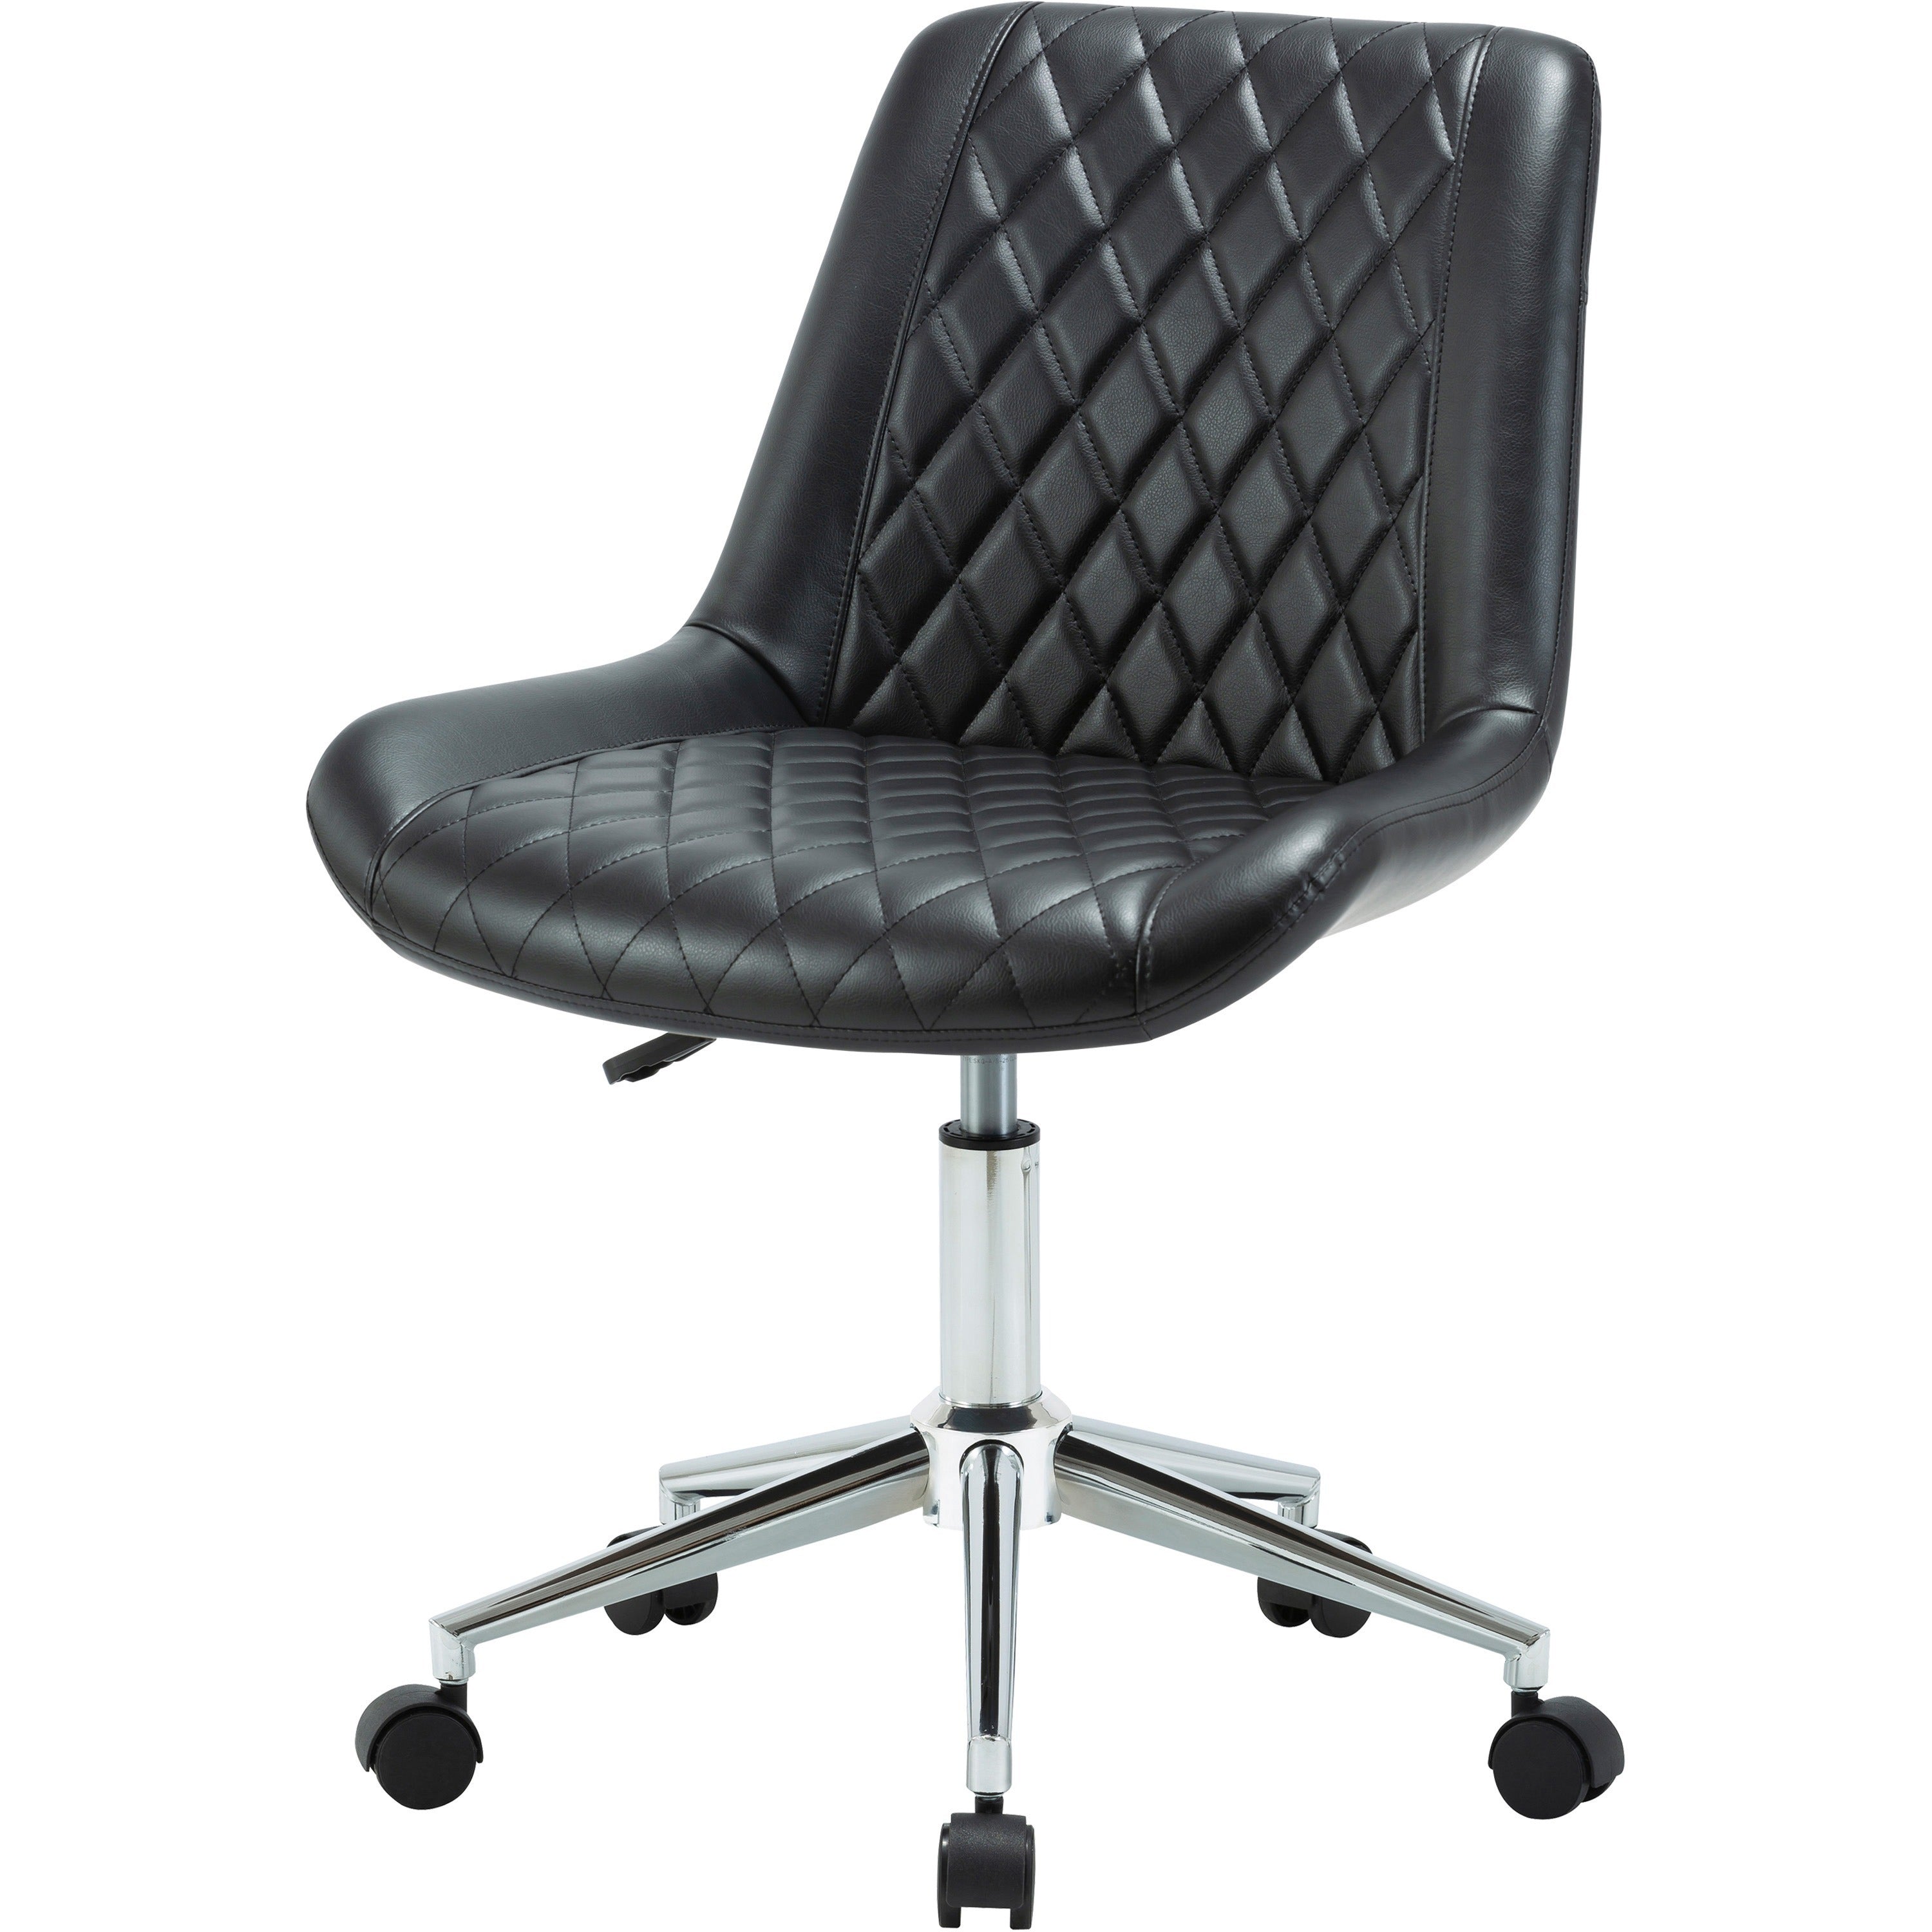 lys-low-back-office-chair-black-plywood-bonded-leather-seat-black-plywood-vinyl-back-low-back-1-each_lysch304bnbk - 4